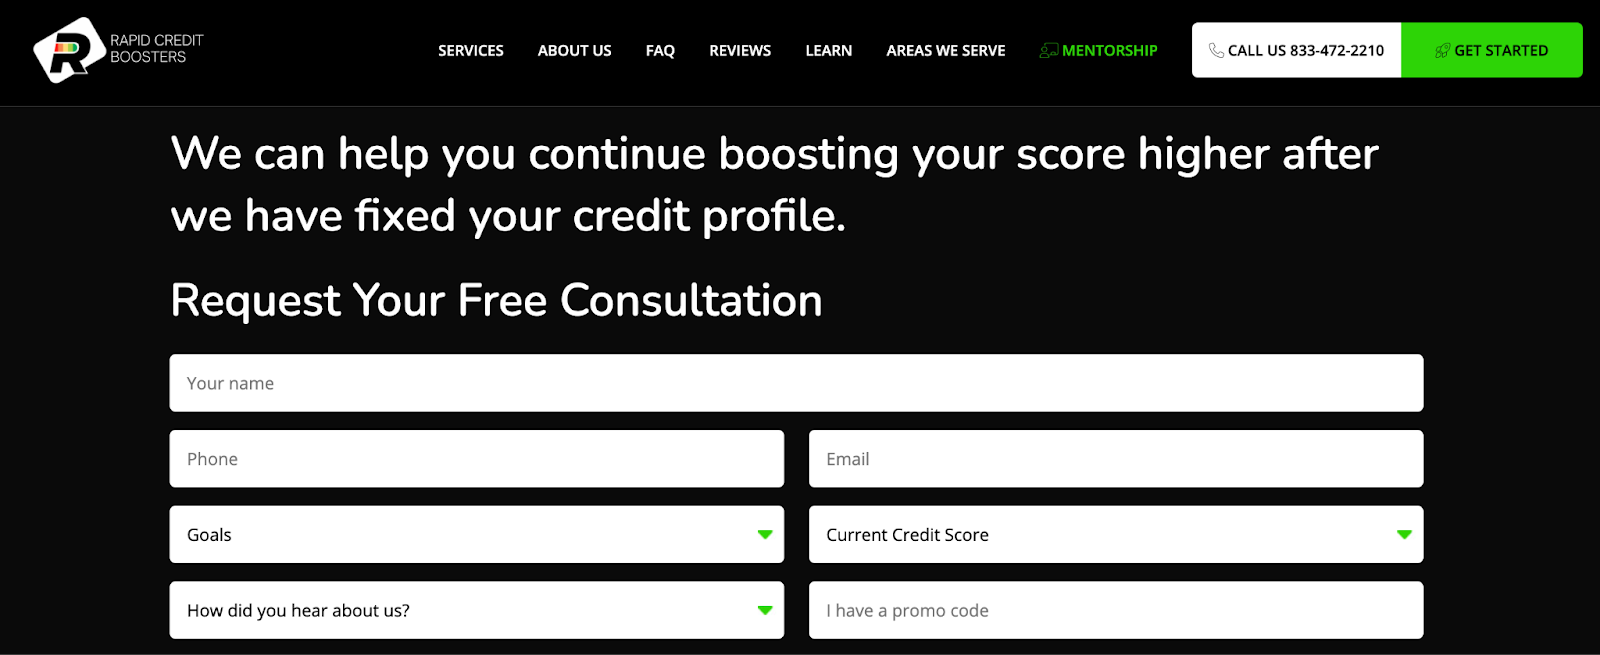 Rapid Credit Boosters Consultation
